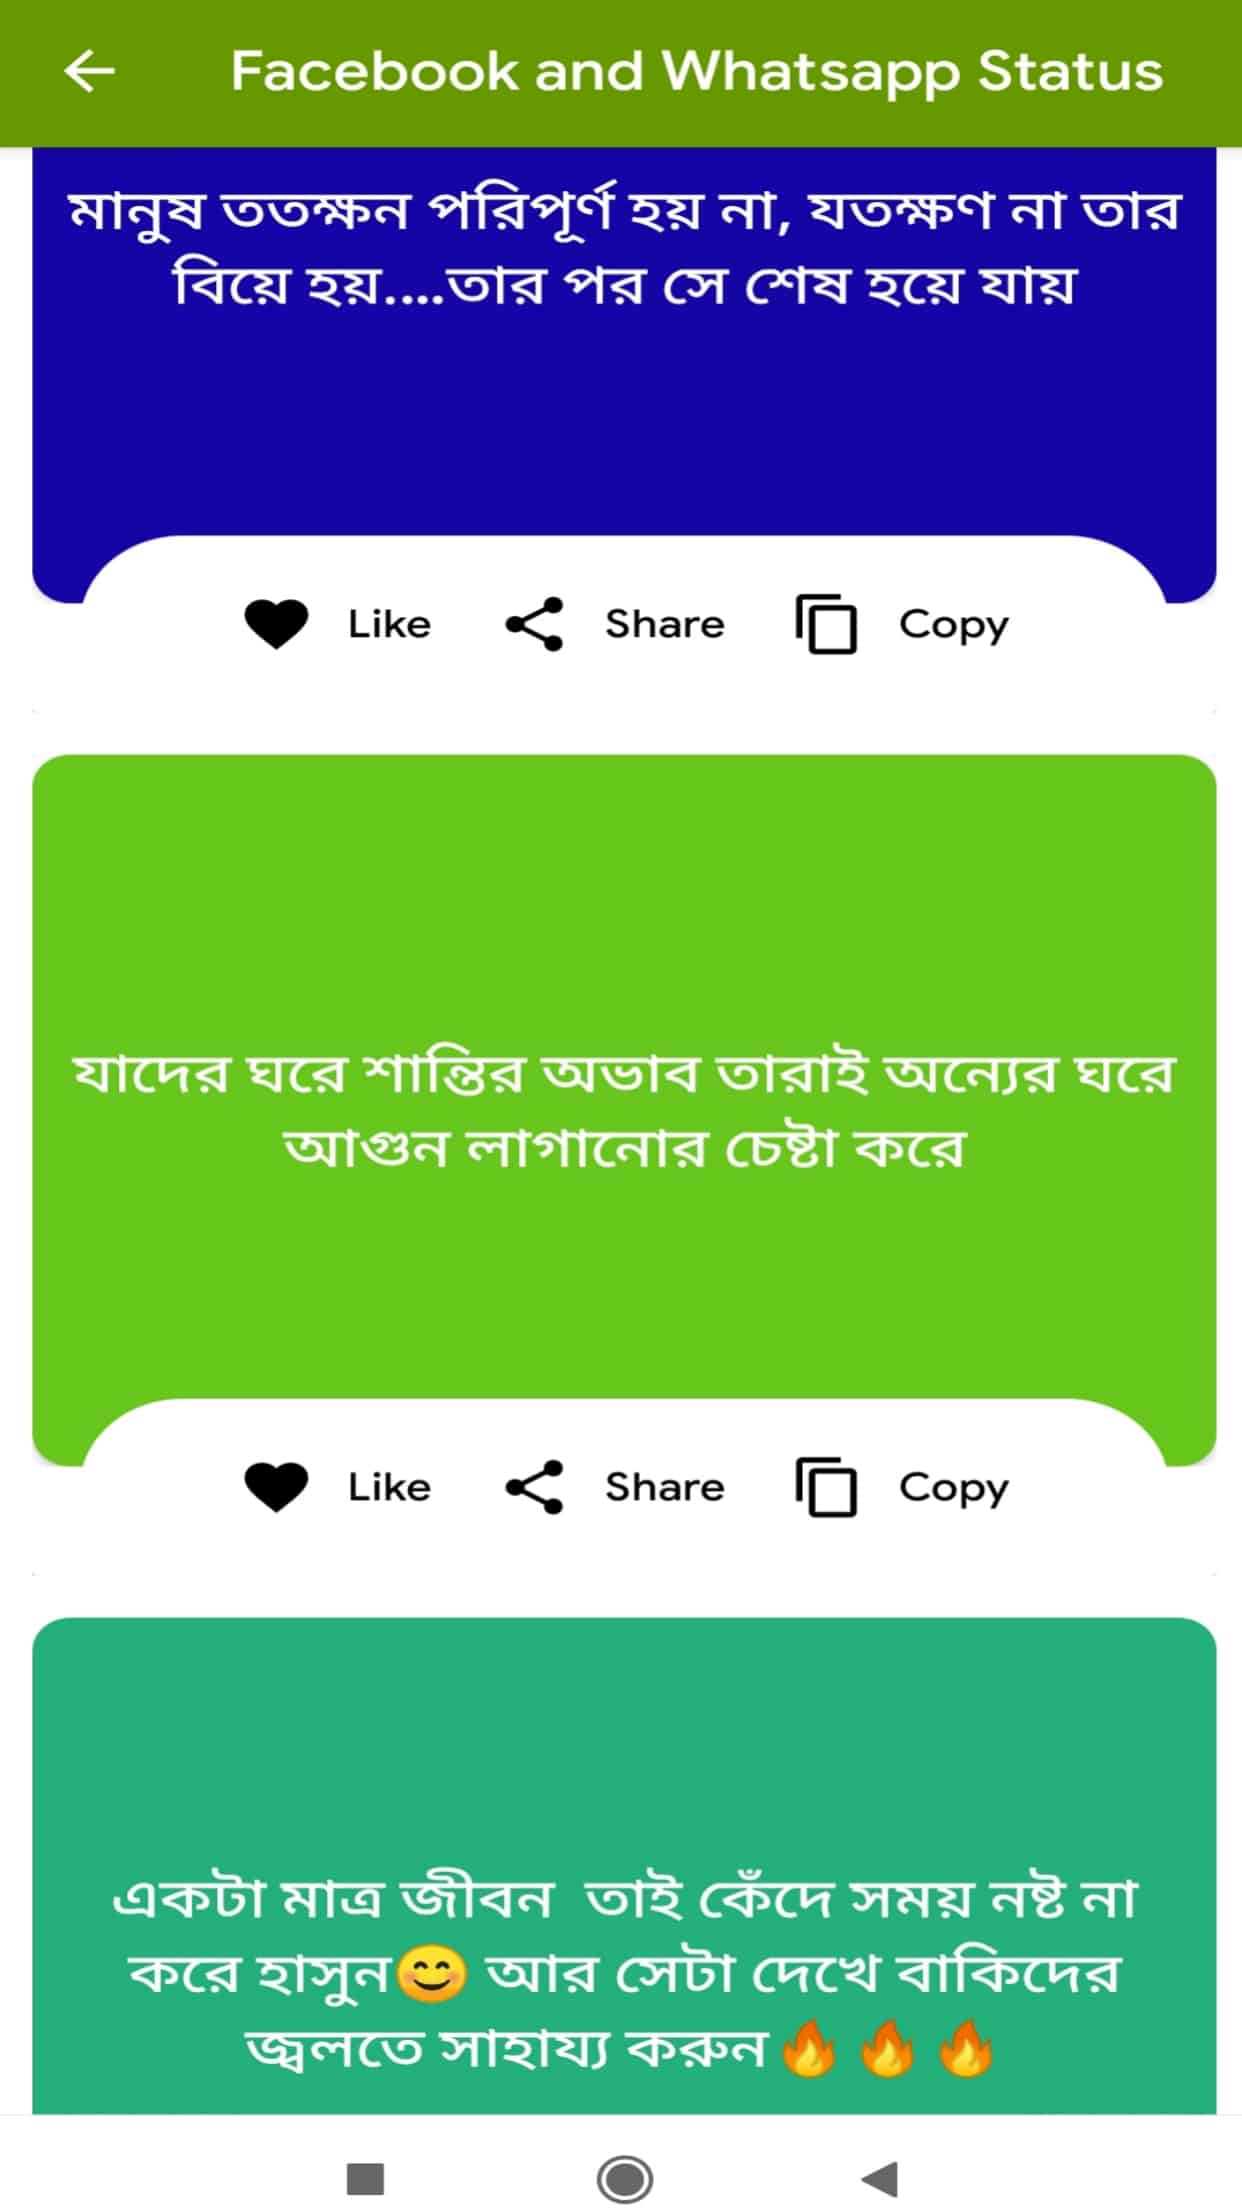 Bengali Captions, Status and Quotes for DP in 2021